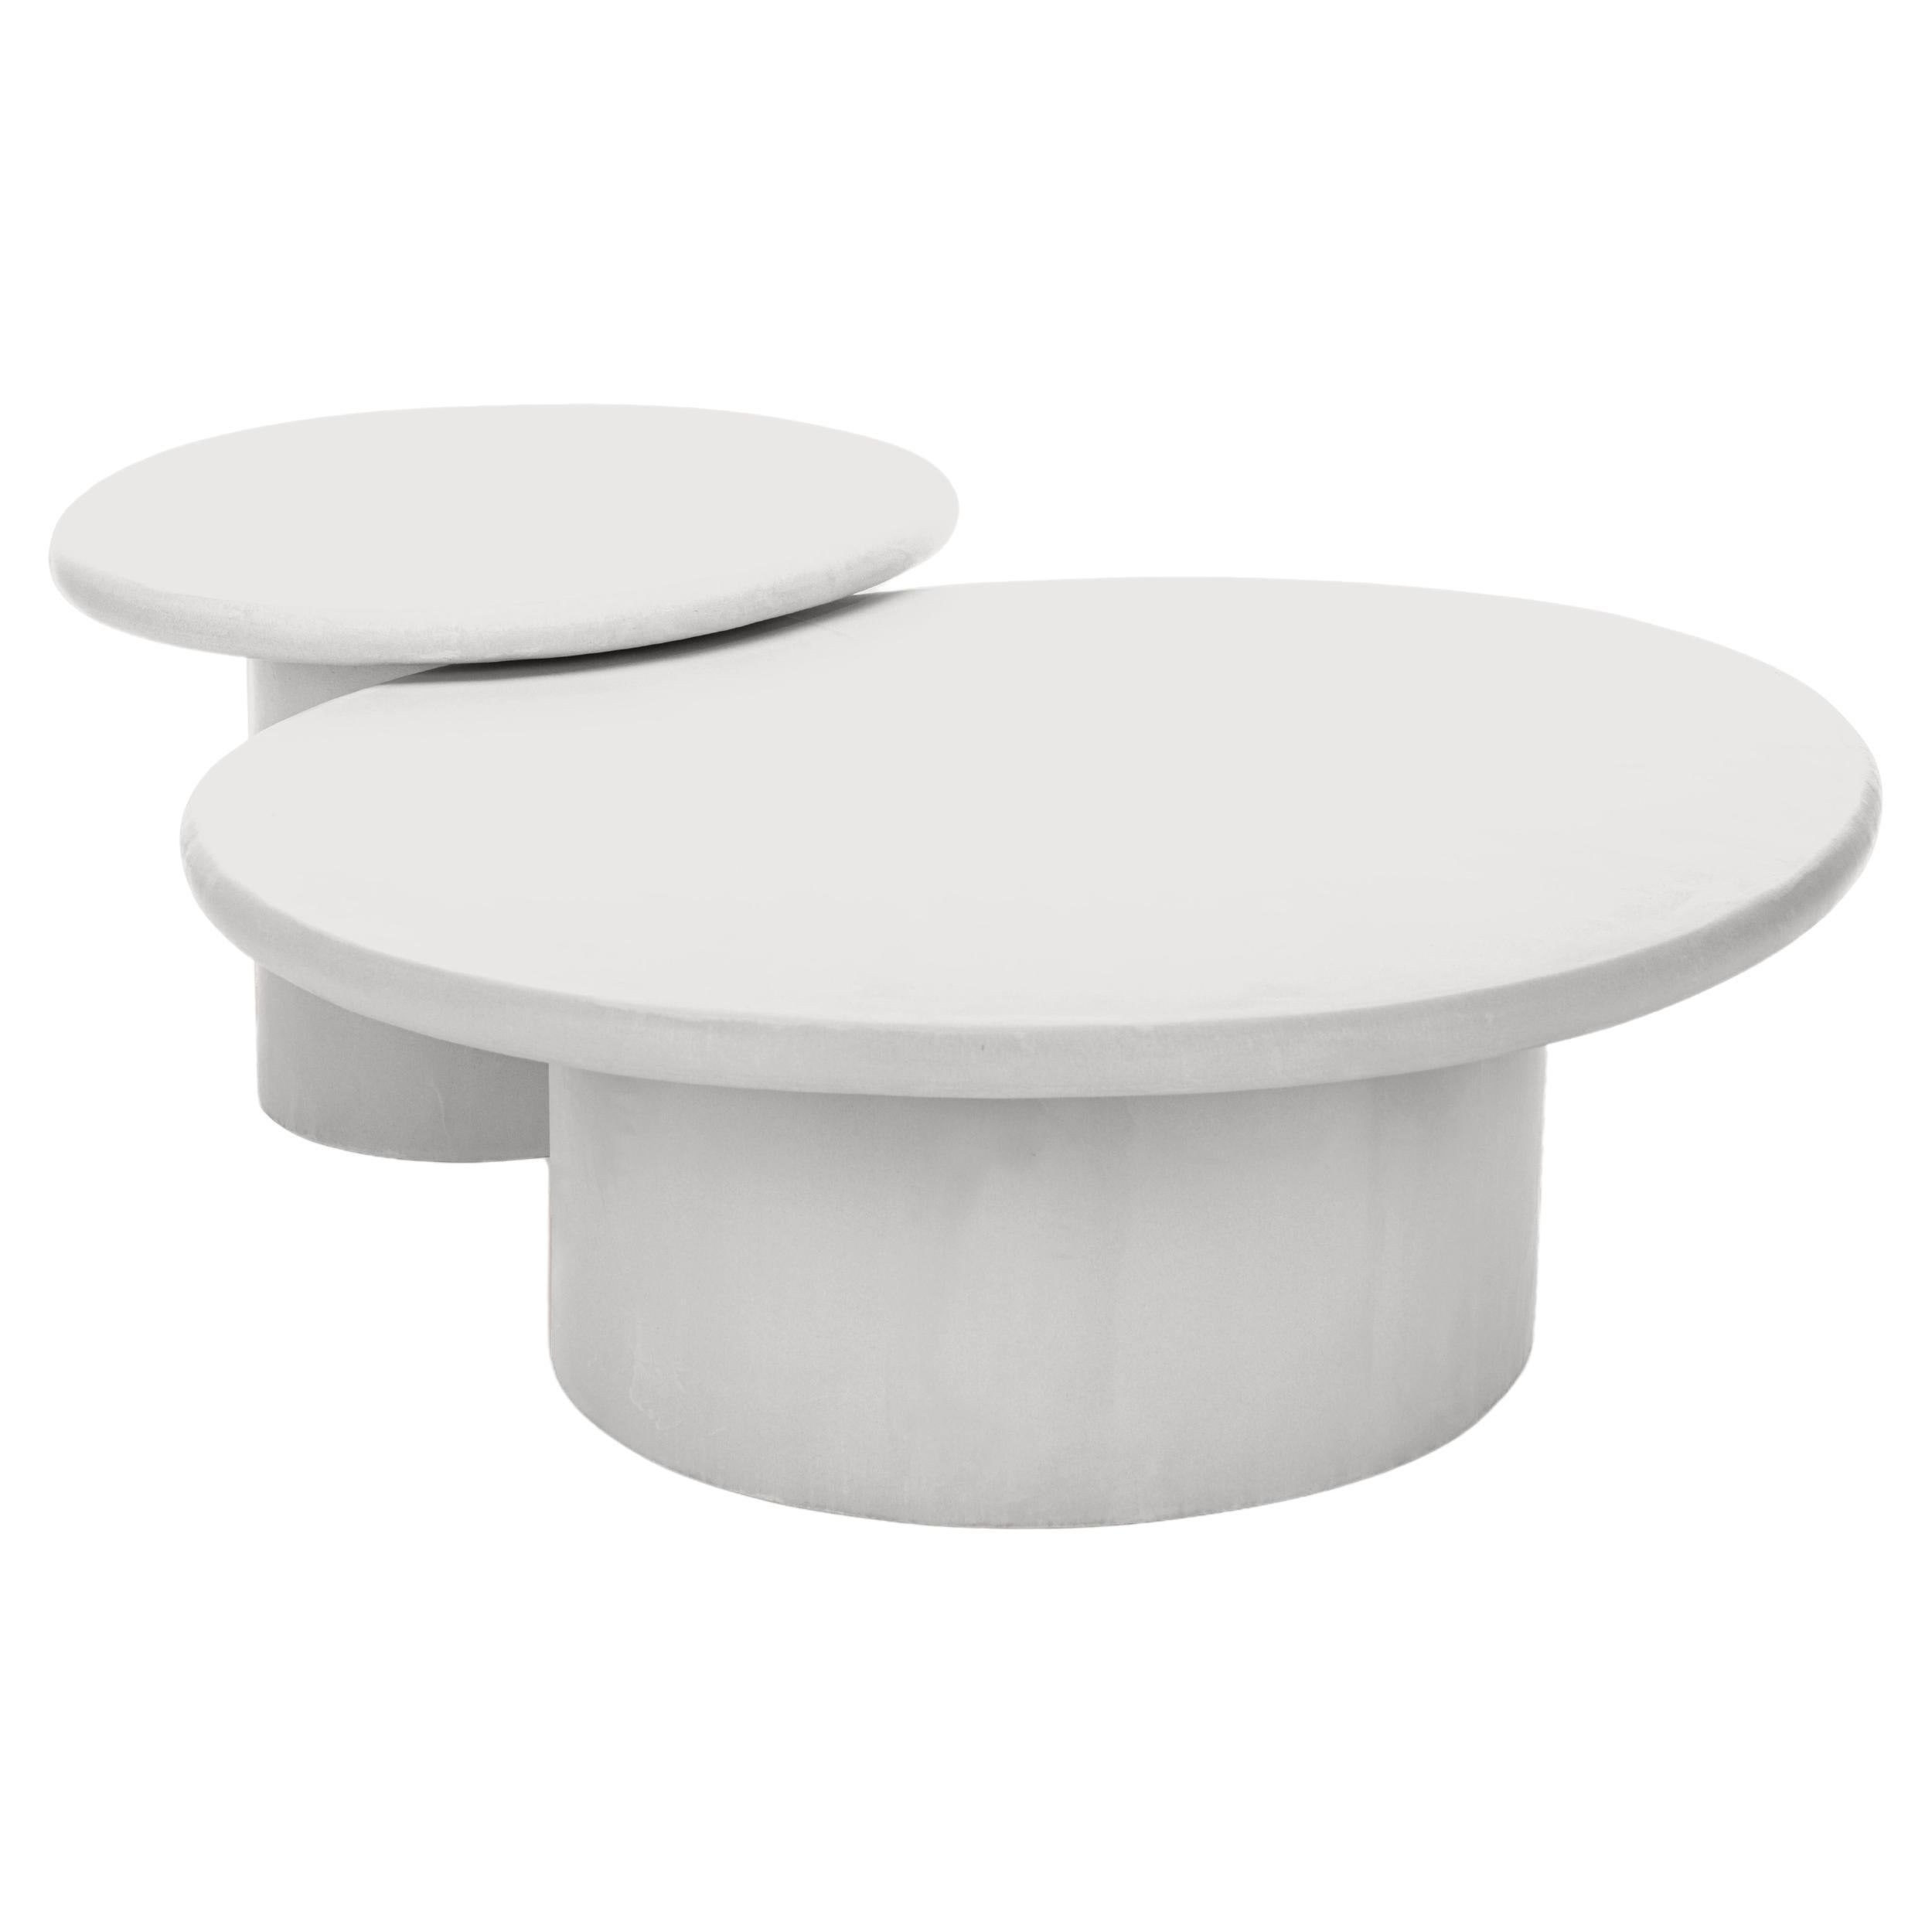 Organic Shaped Natural Plaster Coffee Table Set "Sami" by Isabelle Beaumont For Sale